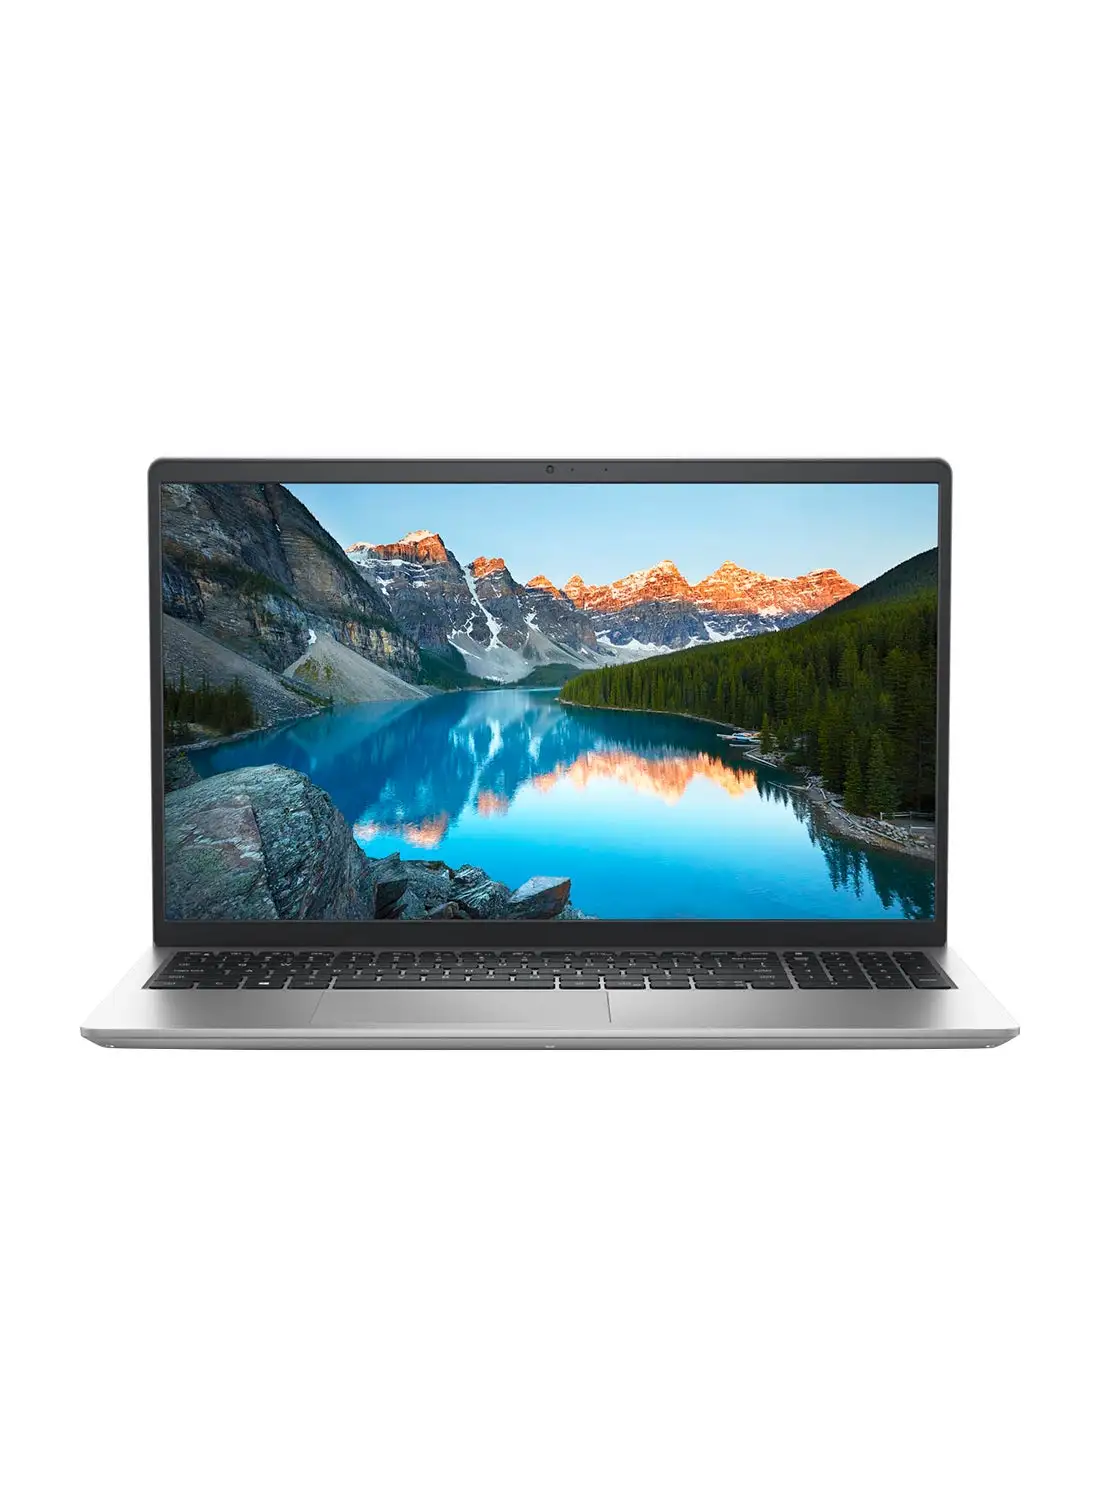 DELL Inspiron 3511 Laptop With 15.6-Inch Display, Core i5-1135G7 Processor / 8GB RAM / 256GB SSD / W11 Home / English Platinum Silver